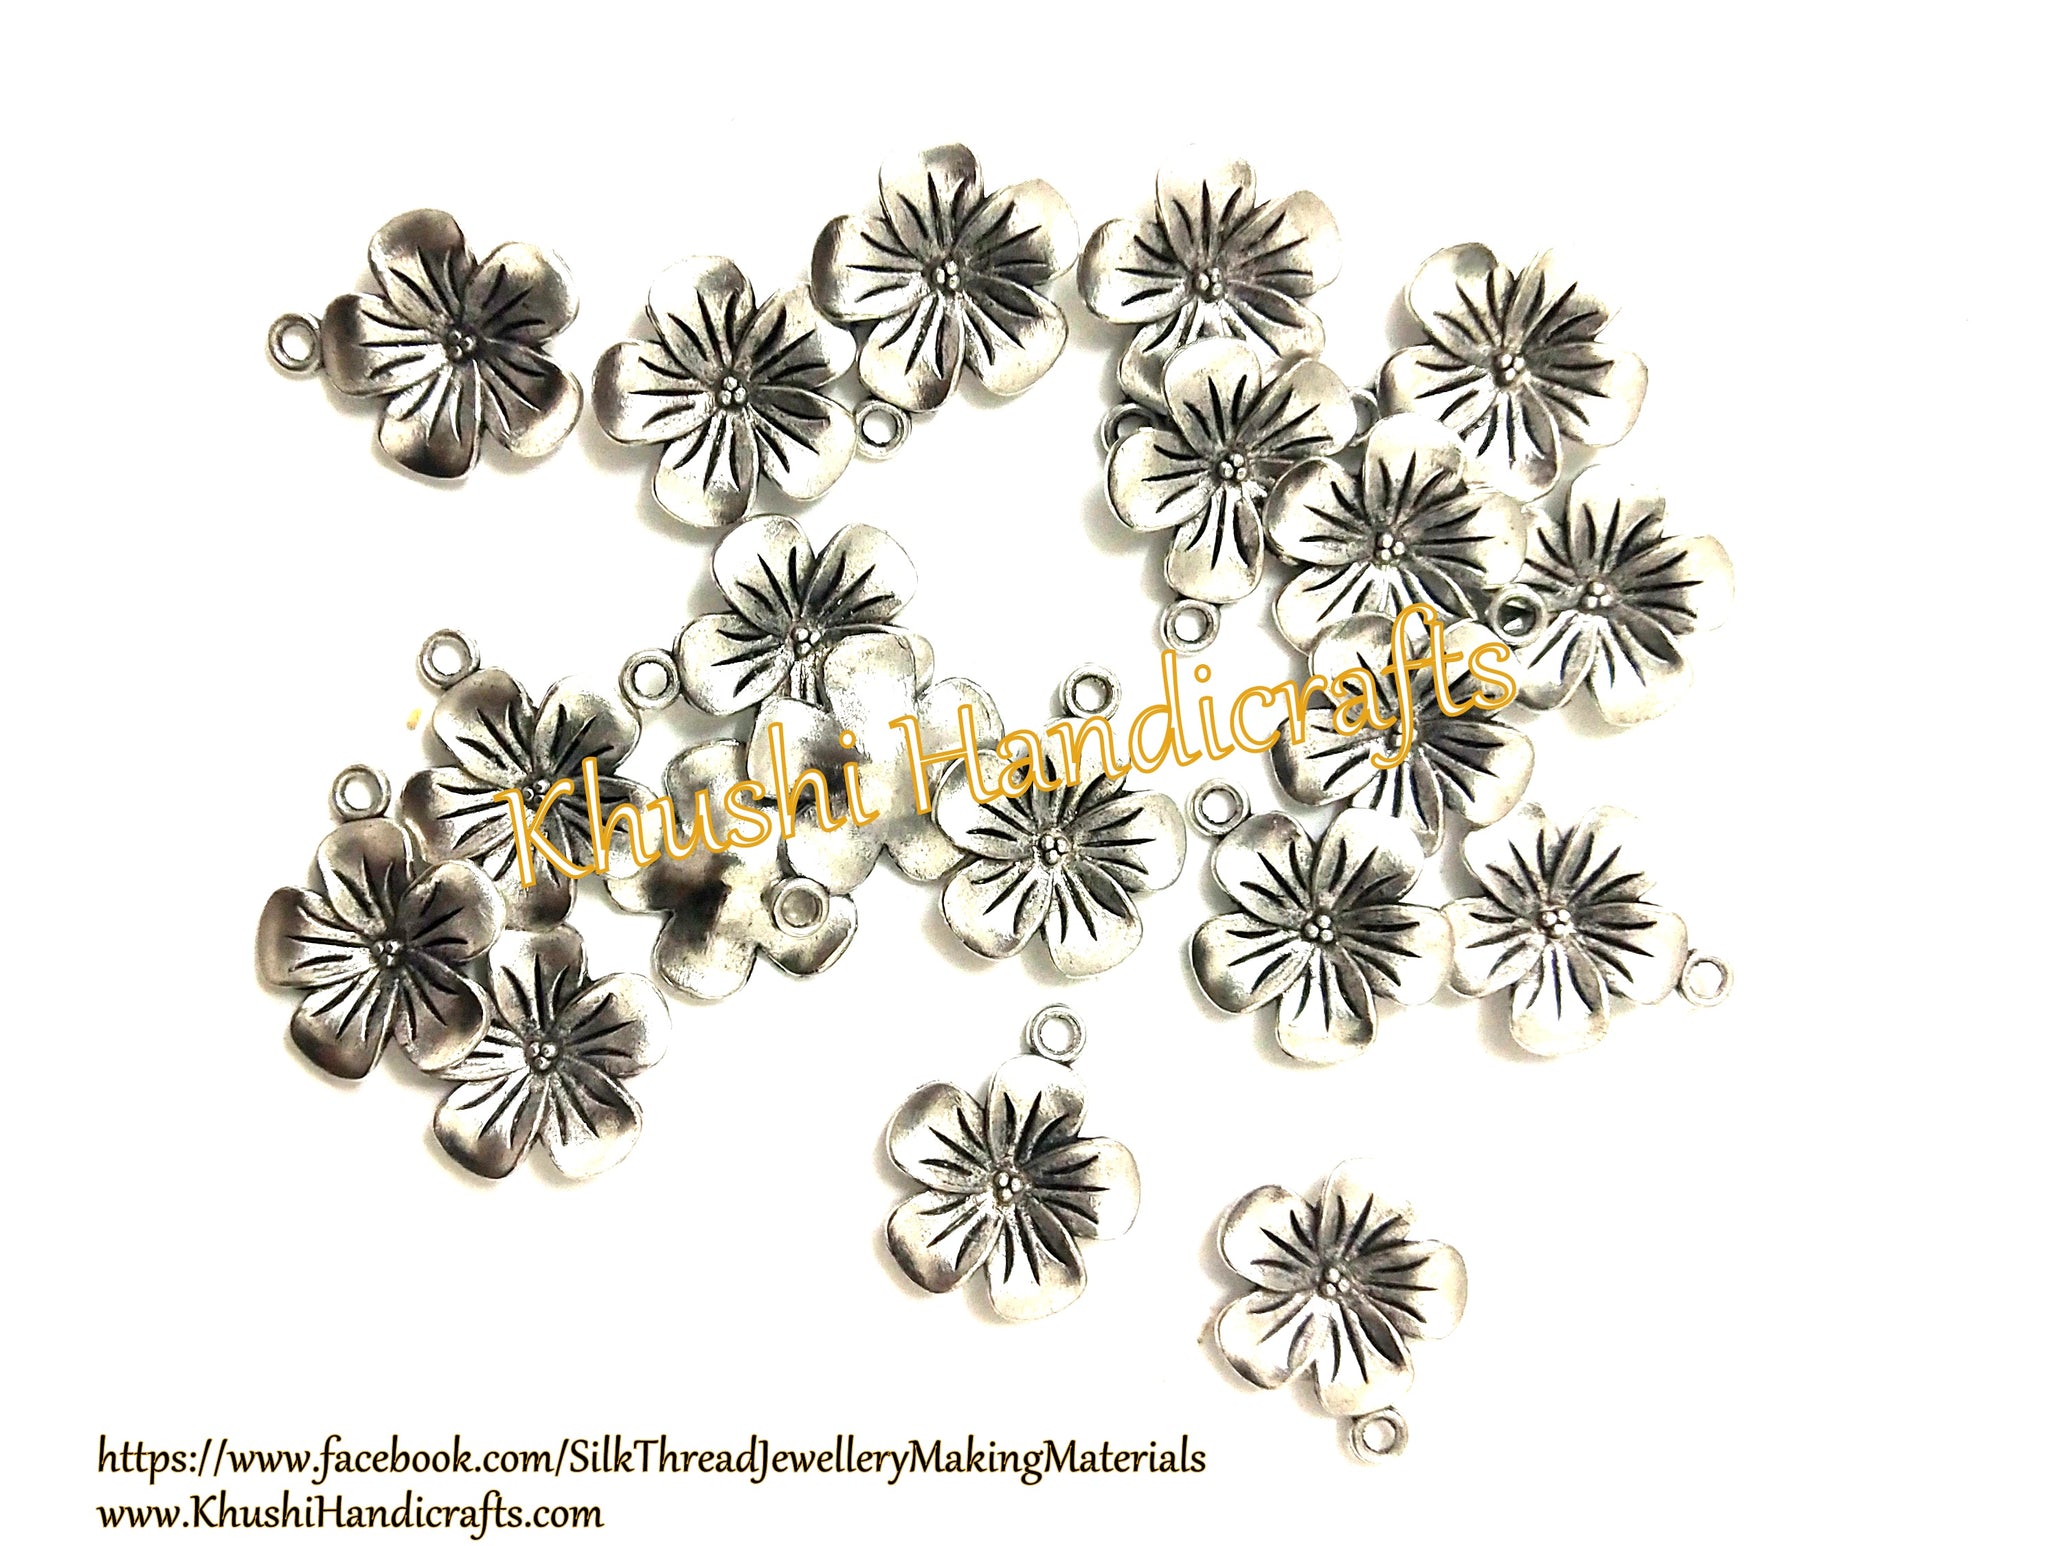 Antique Silver Flower charms.Pack of 20 pieces!